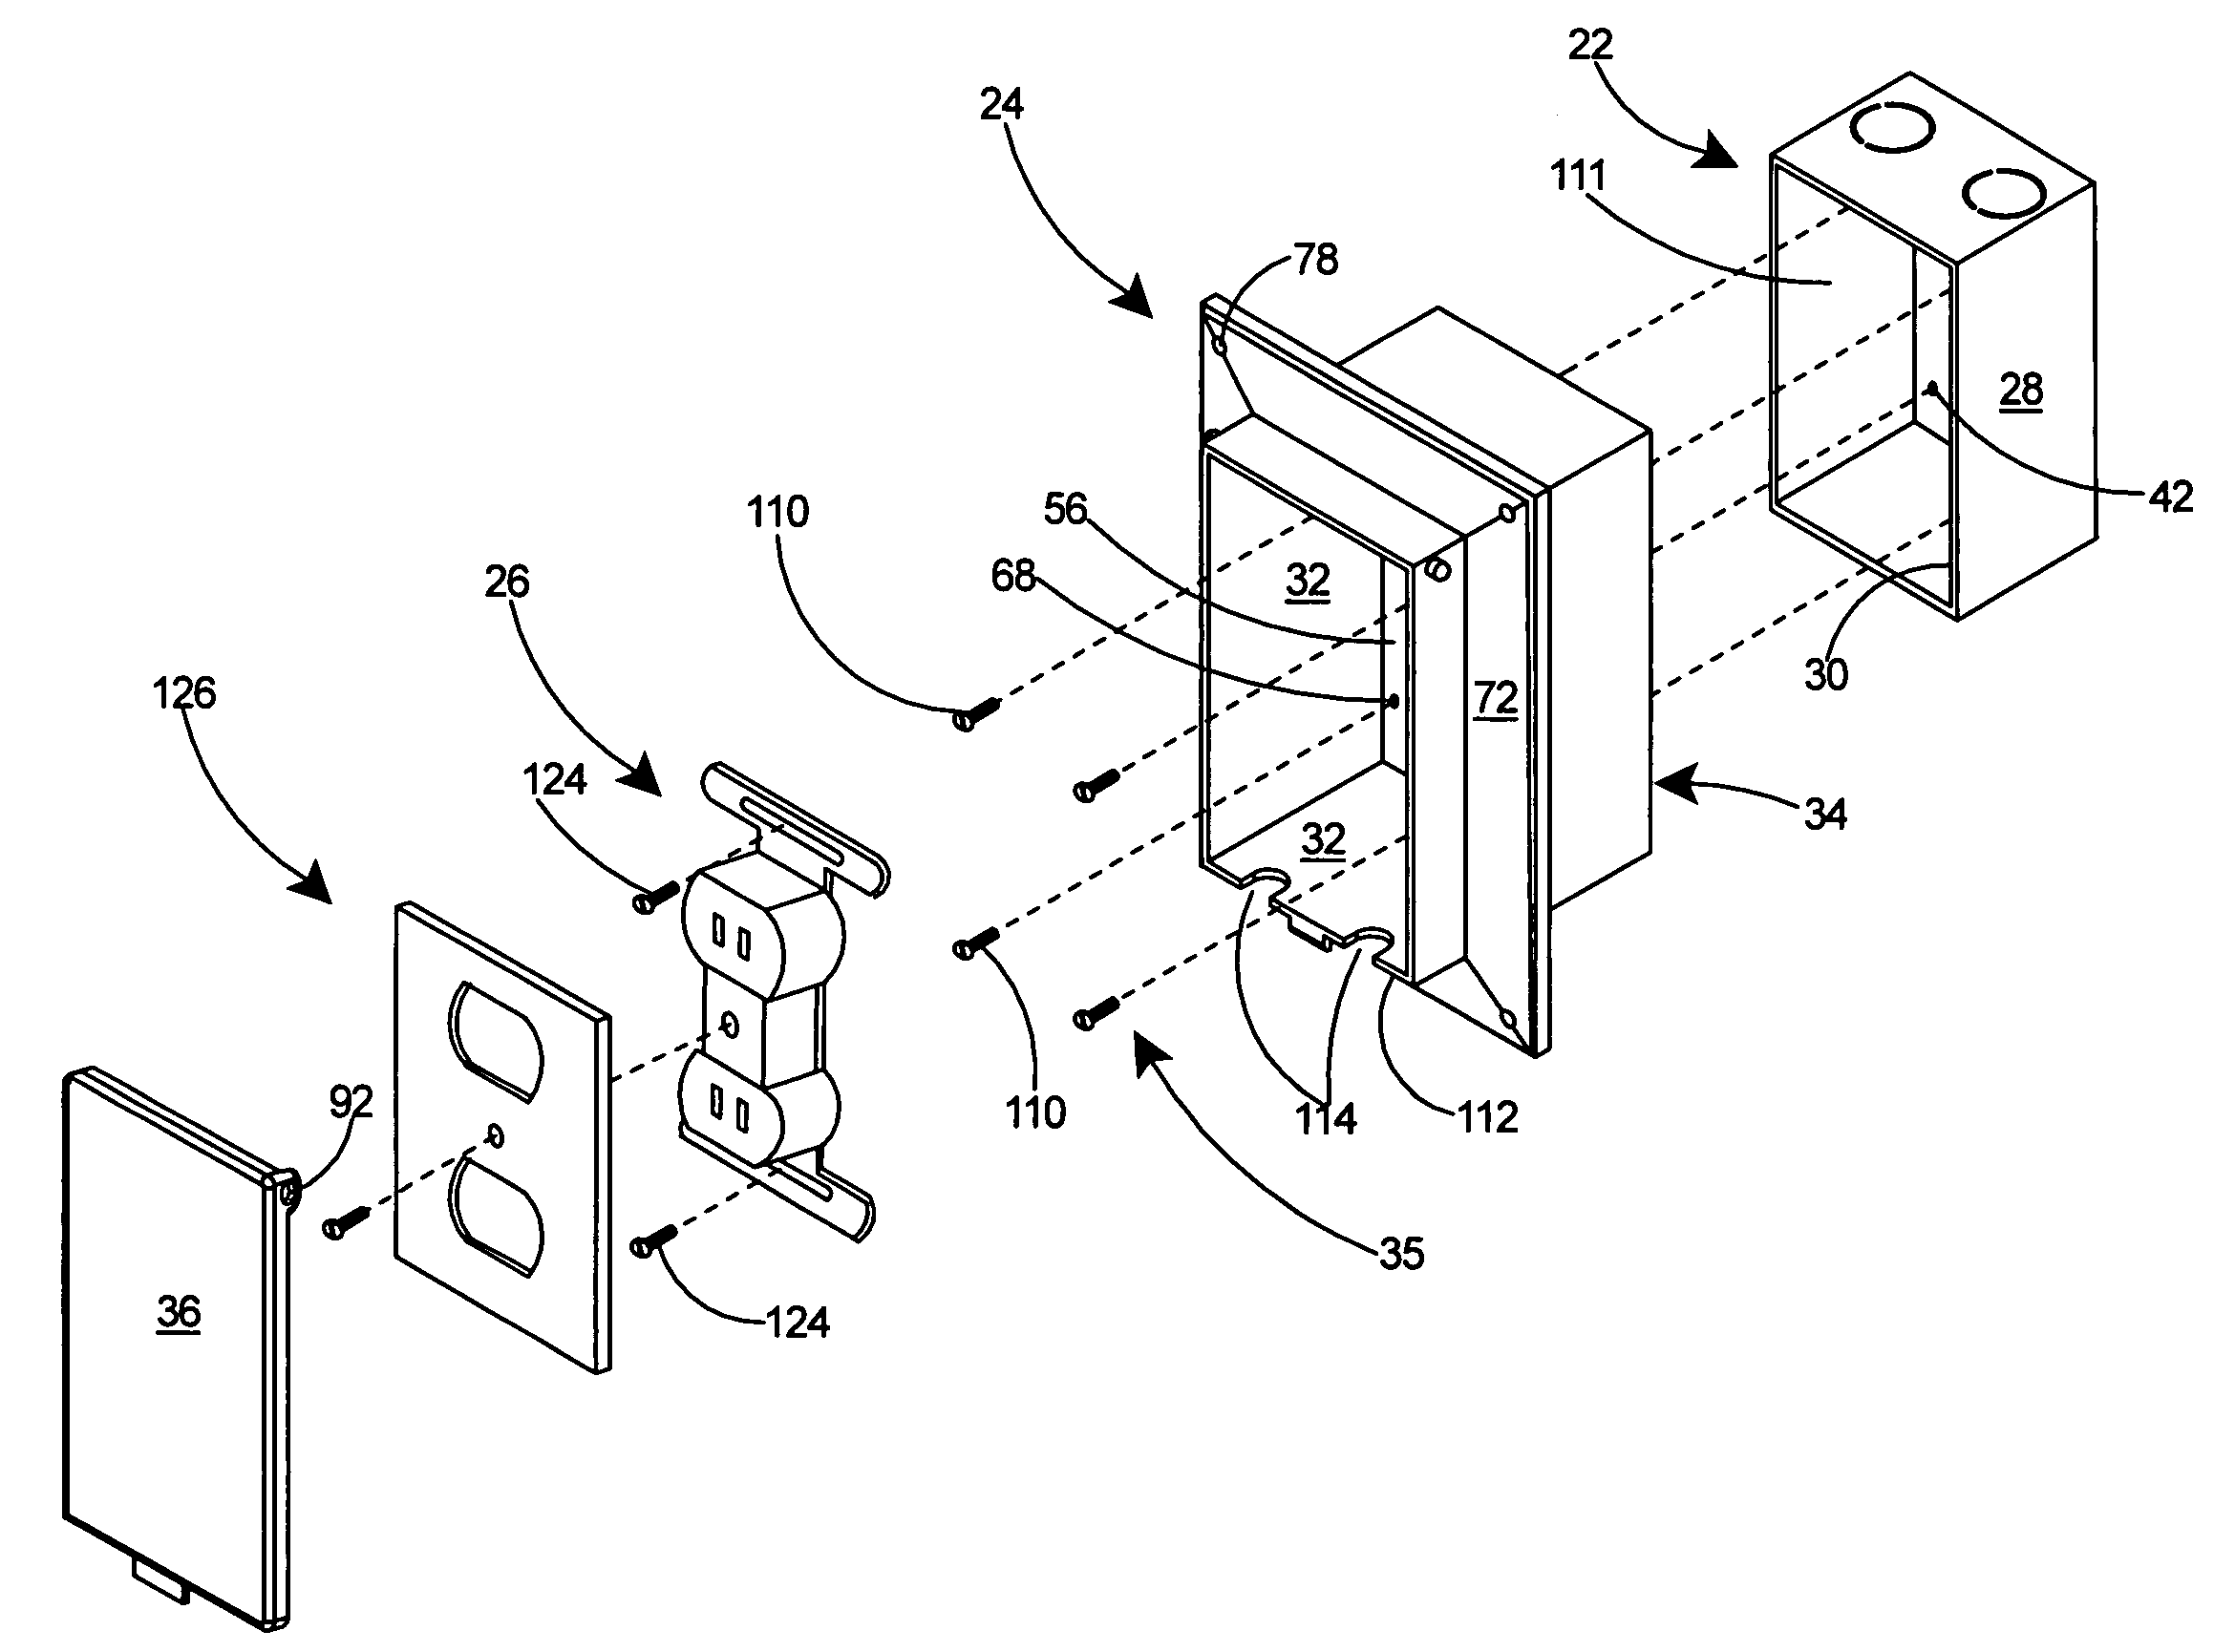 Electrical box assembly for recessing an electrical device